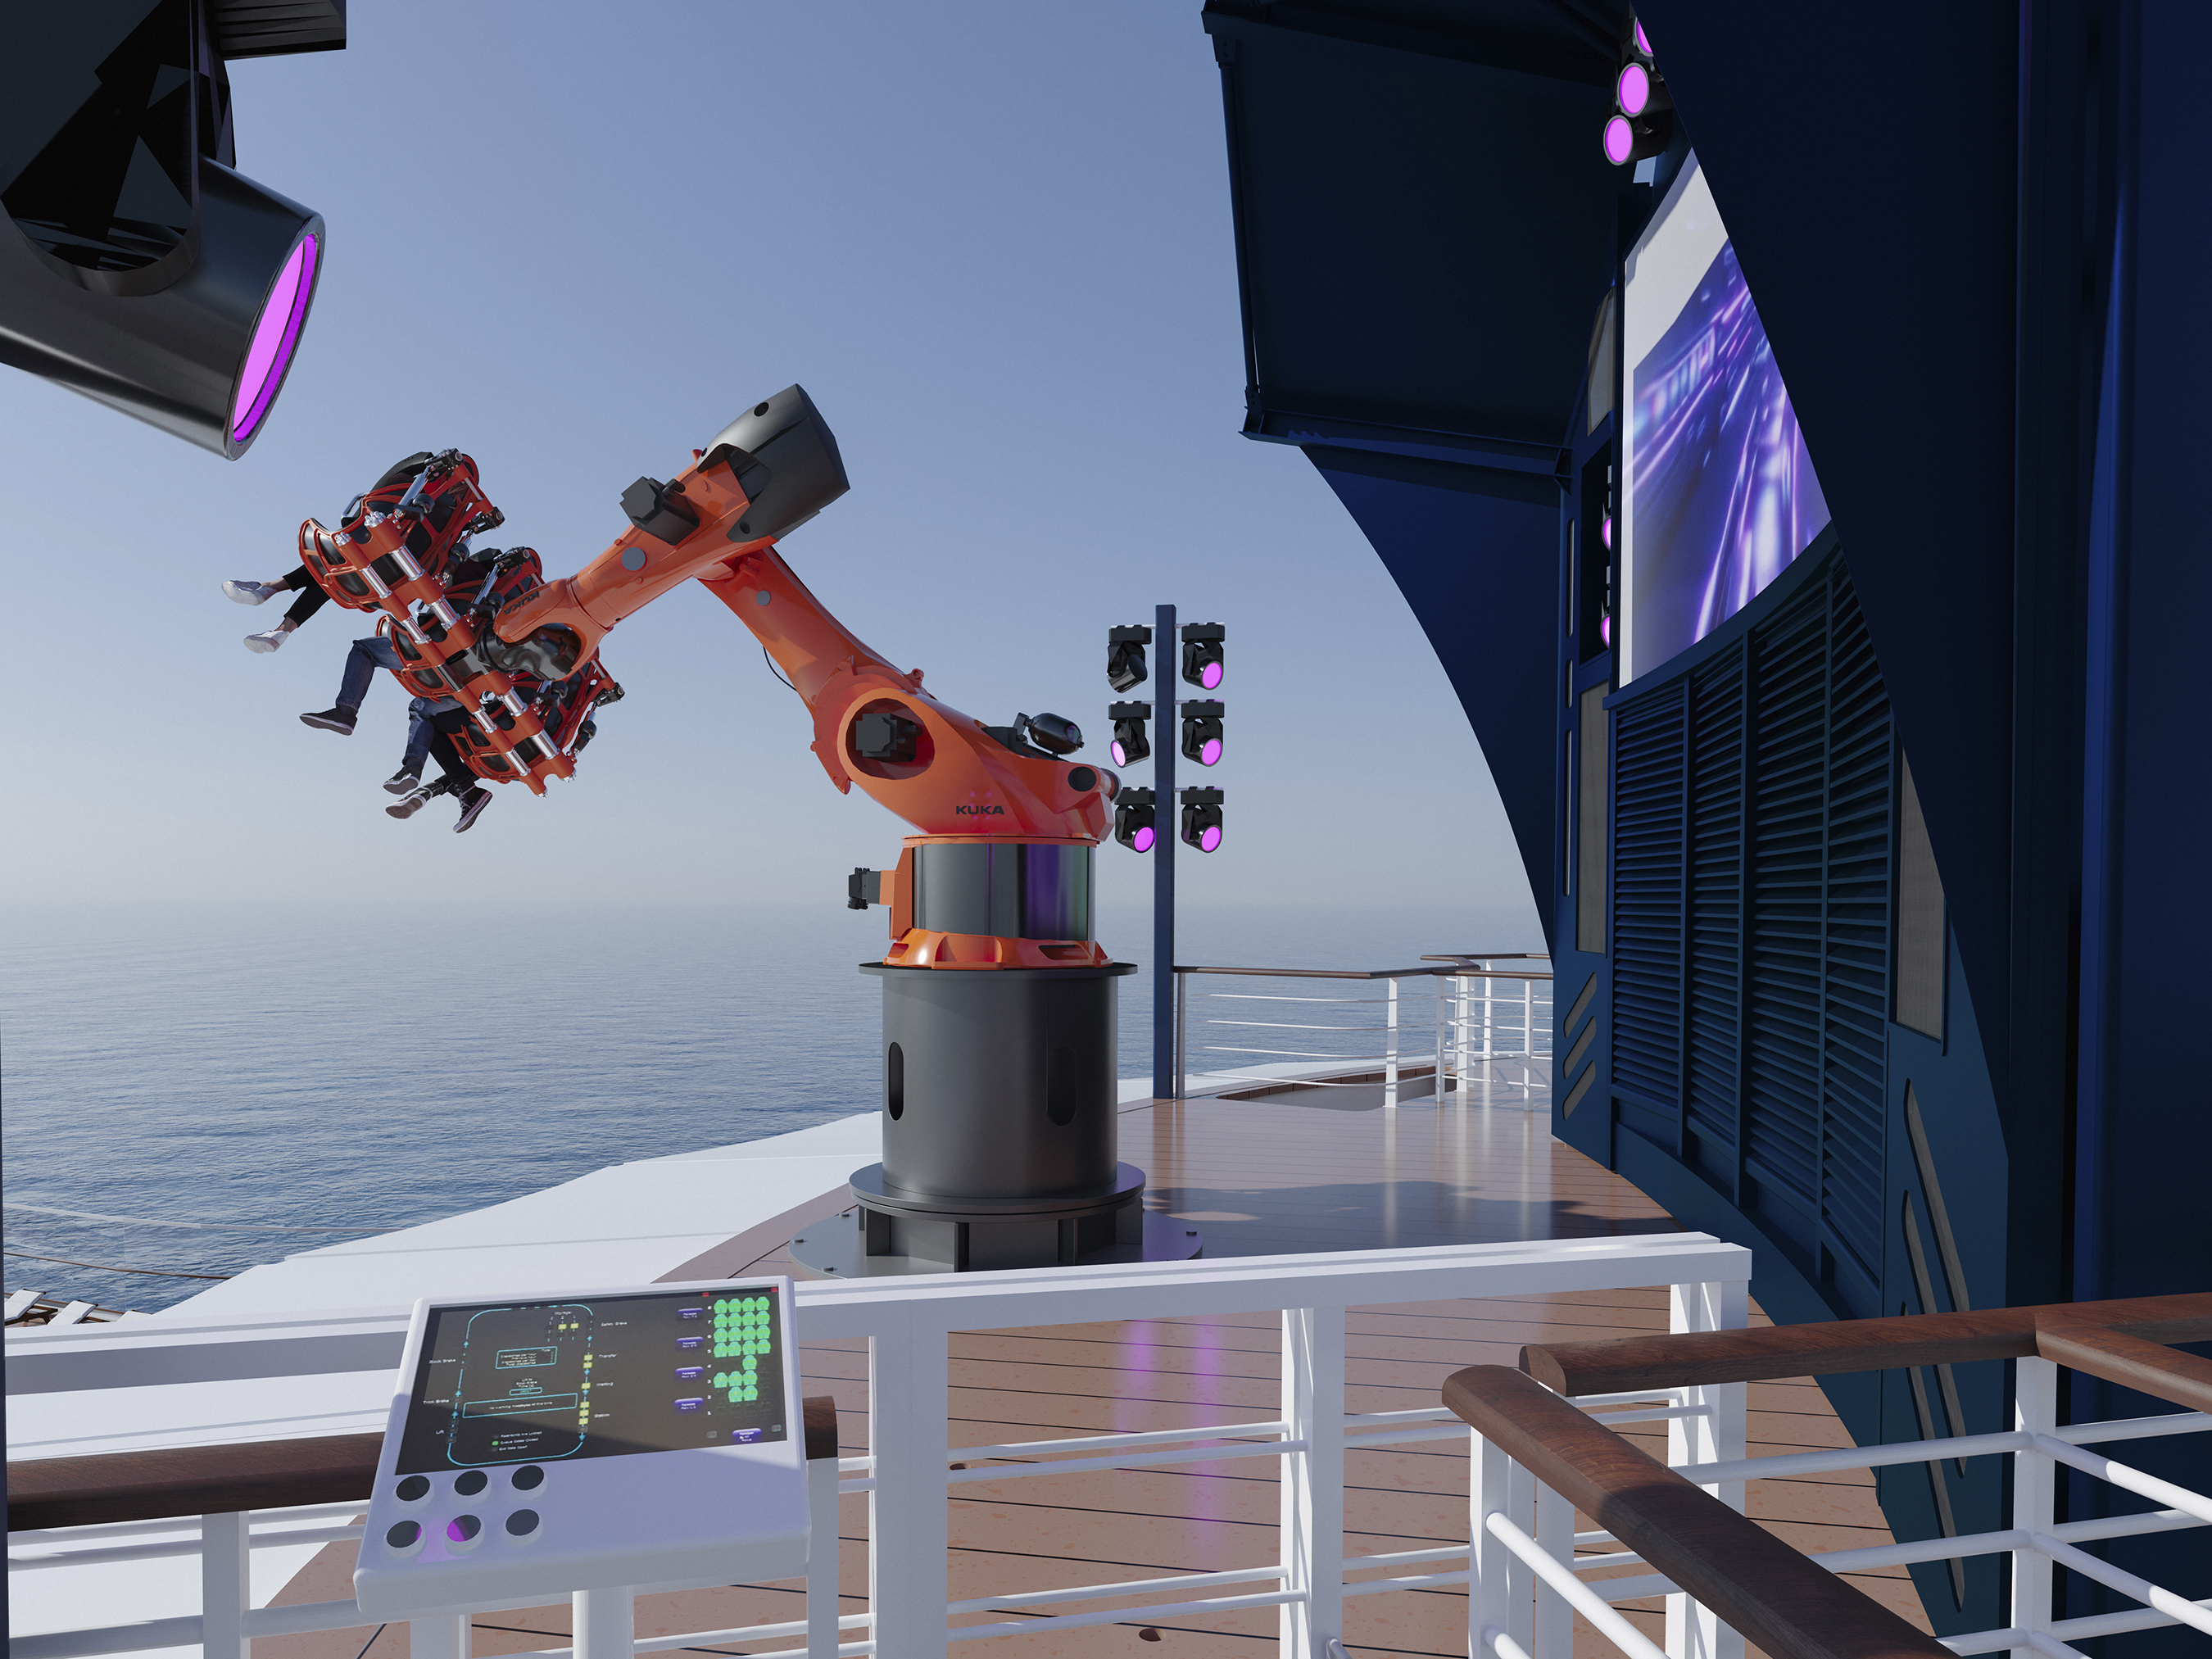 ROBOTRON will fly guests nearly 175 feet over the sea onboard MSC Seascape.